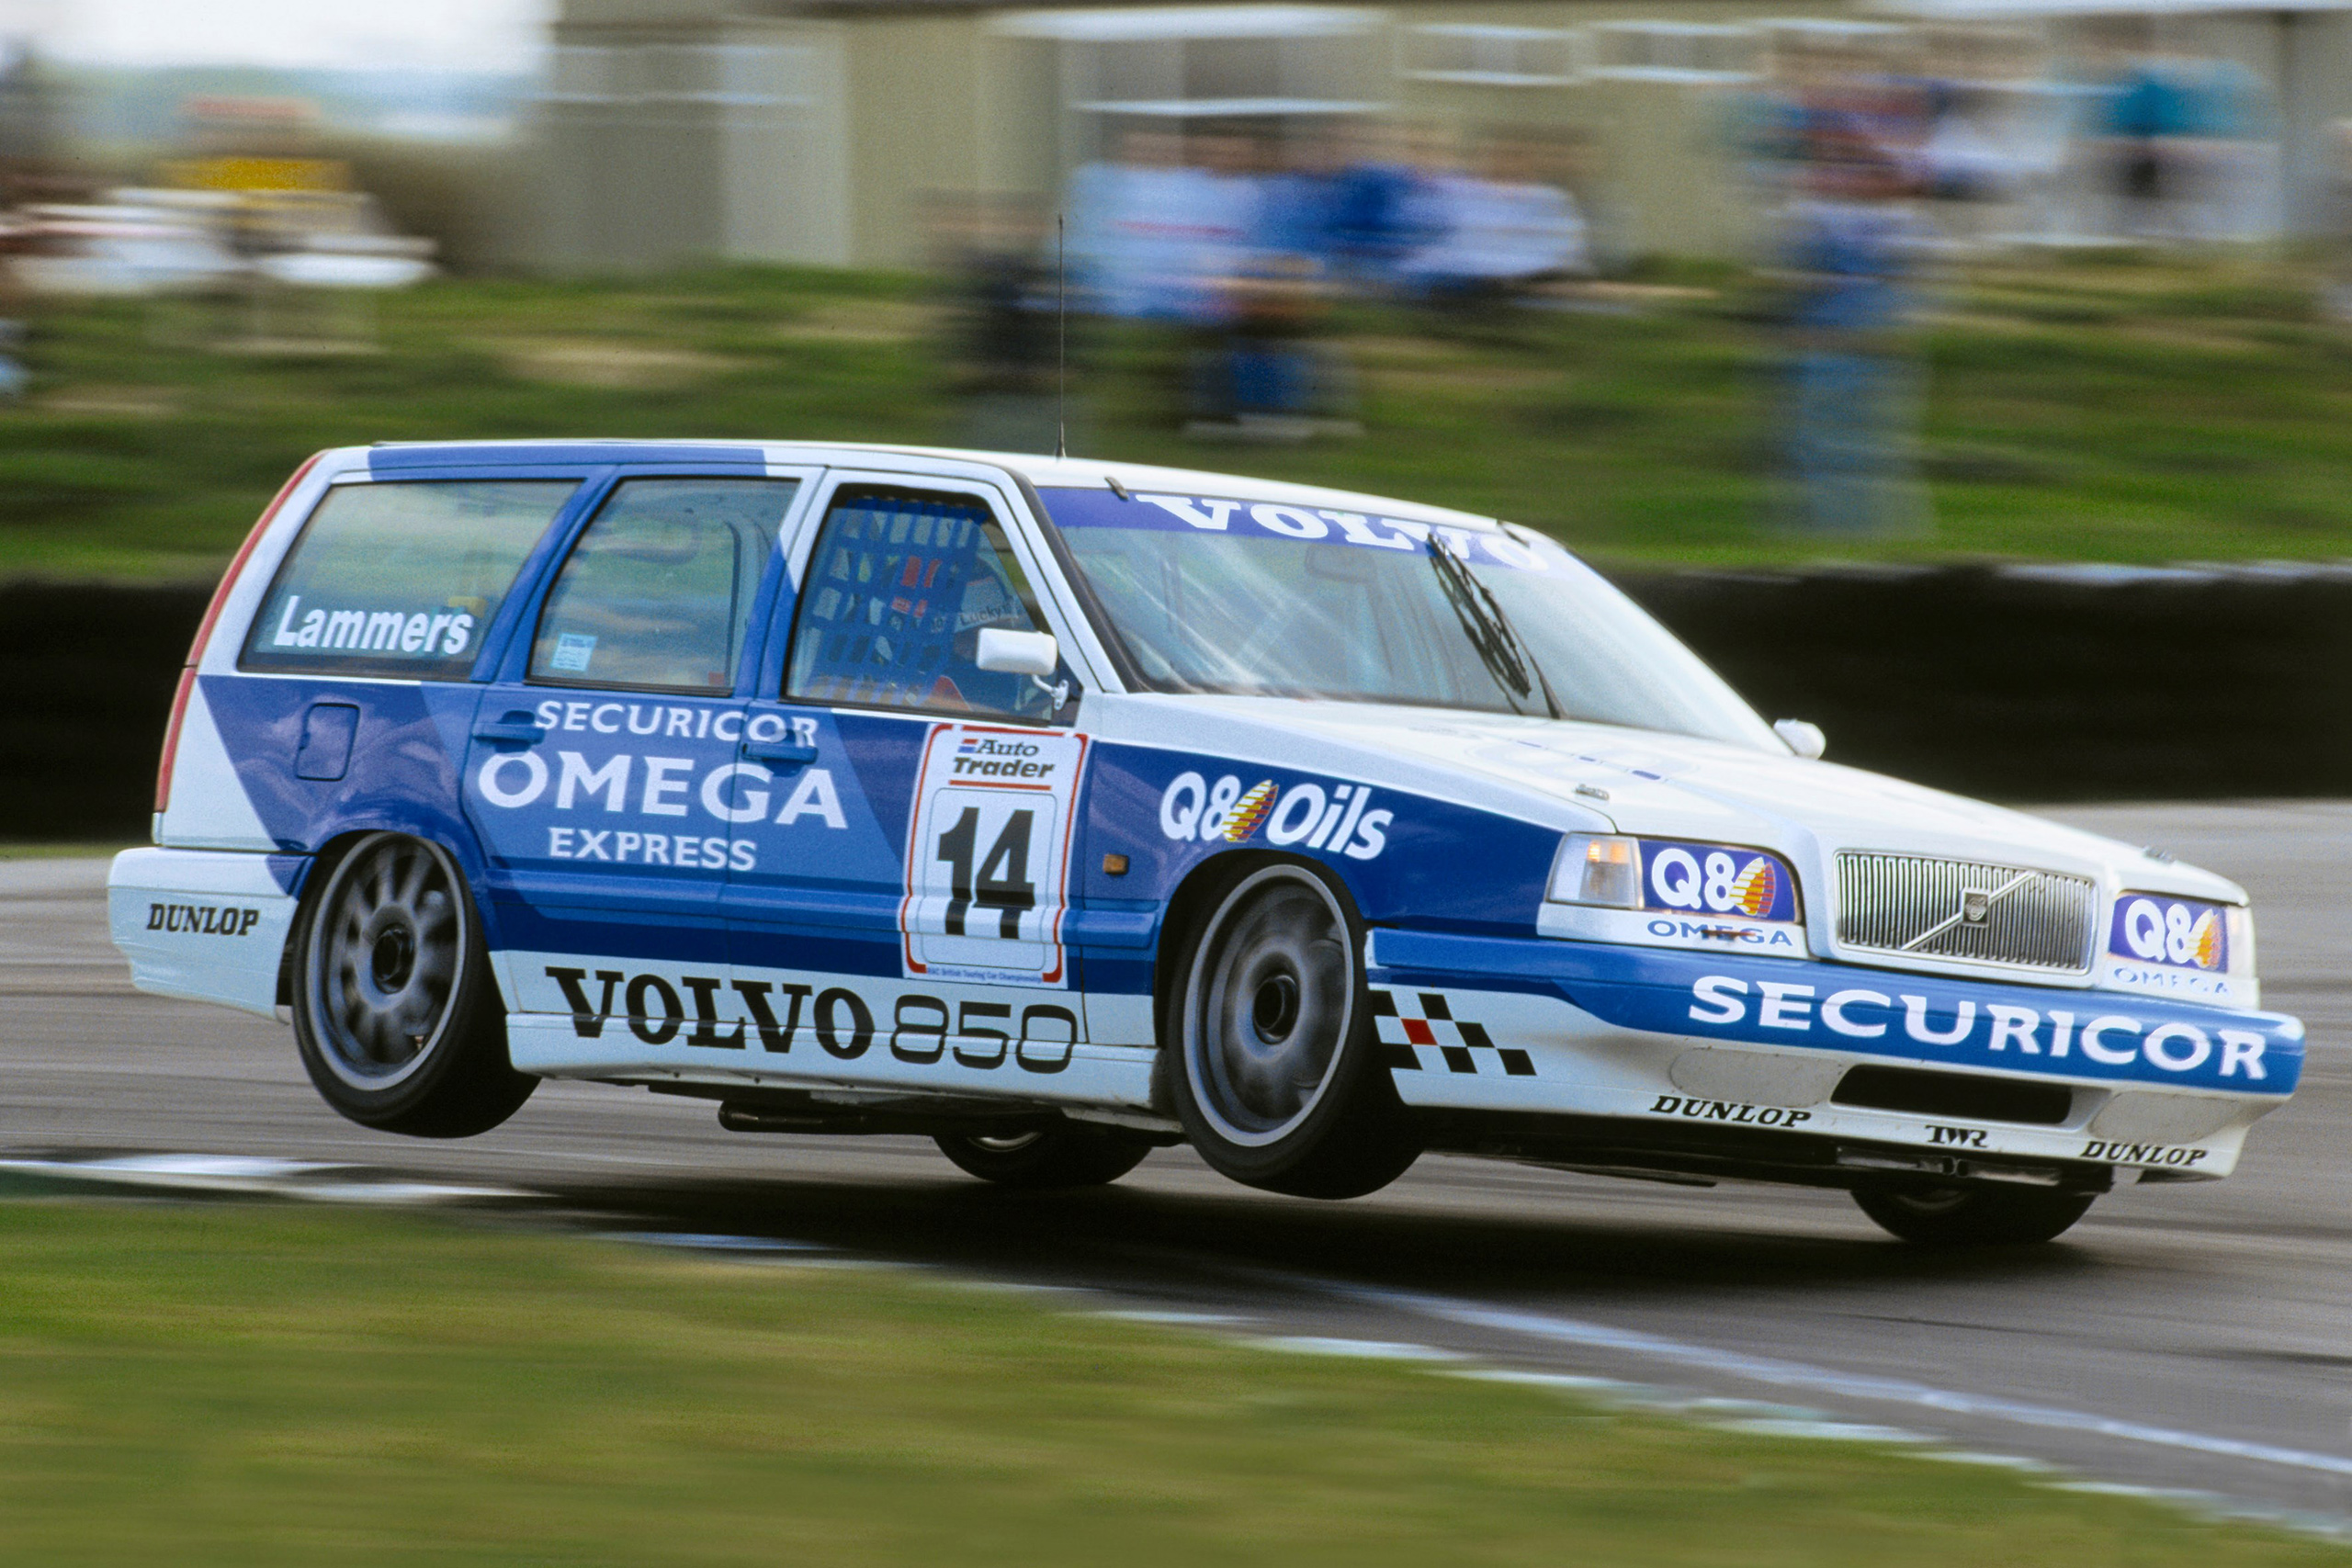 Volvo 850 Estate BTCC touring car up on two wheels during a race.